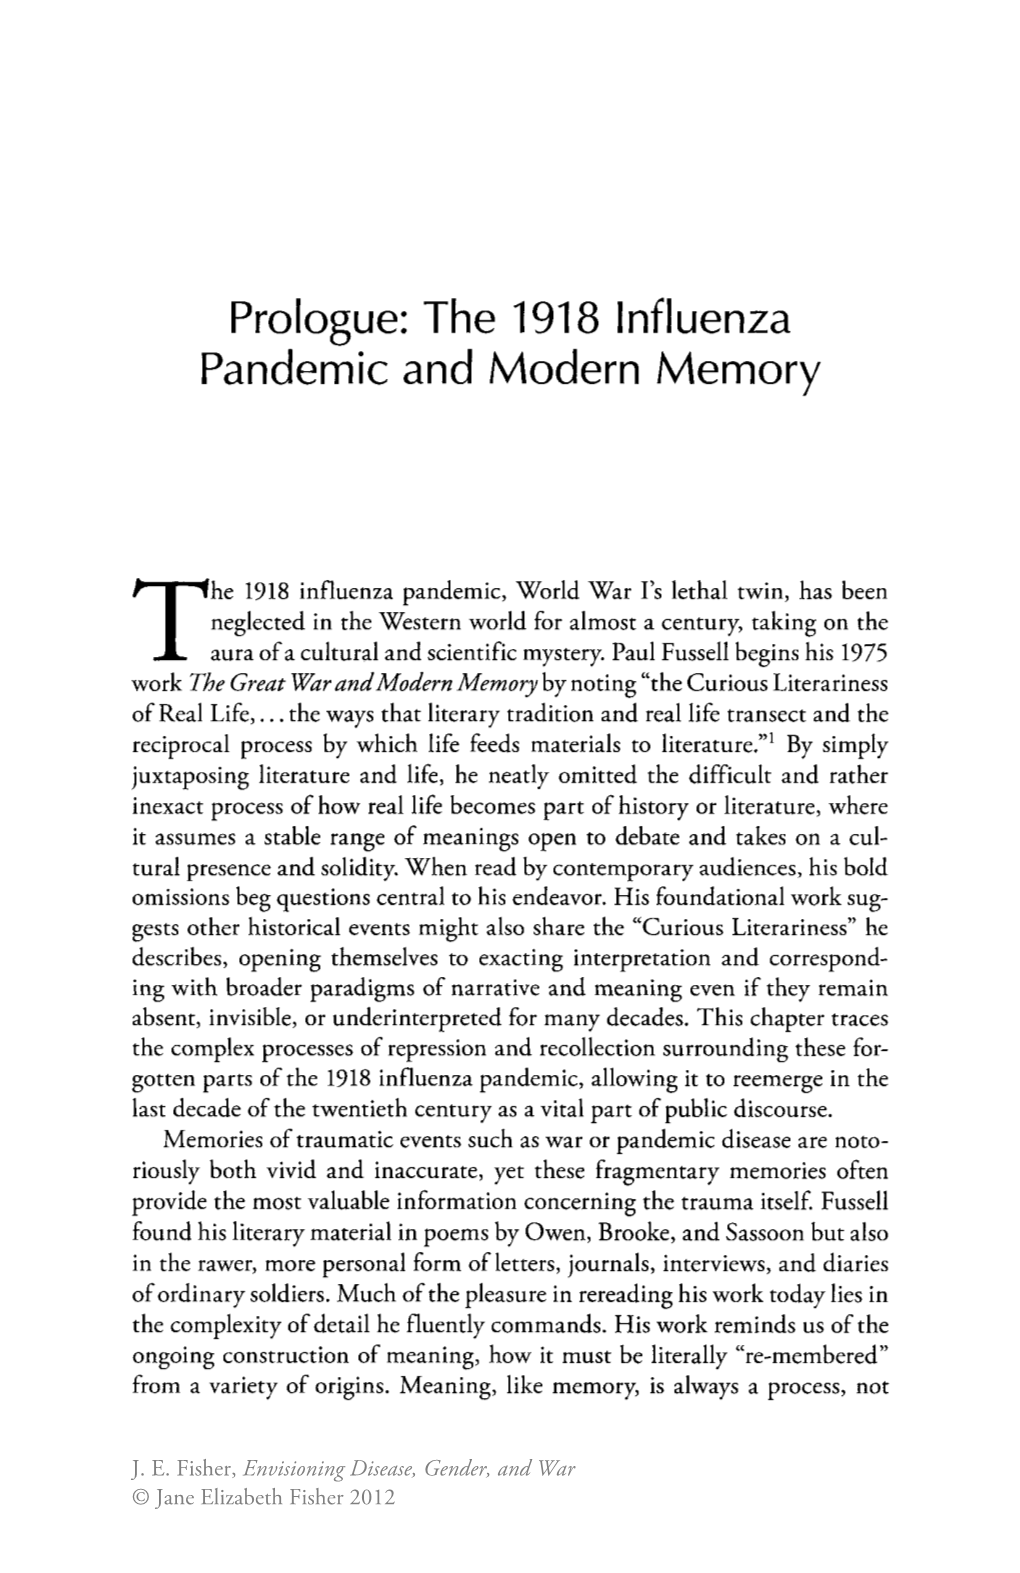 Prologue: the 1918 Influenza Pandemic and Modern Memory